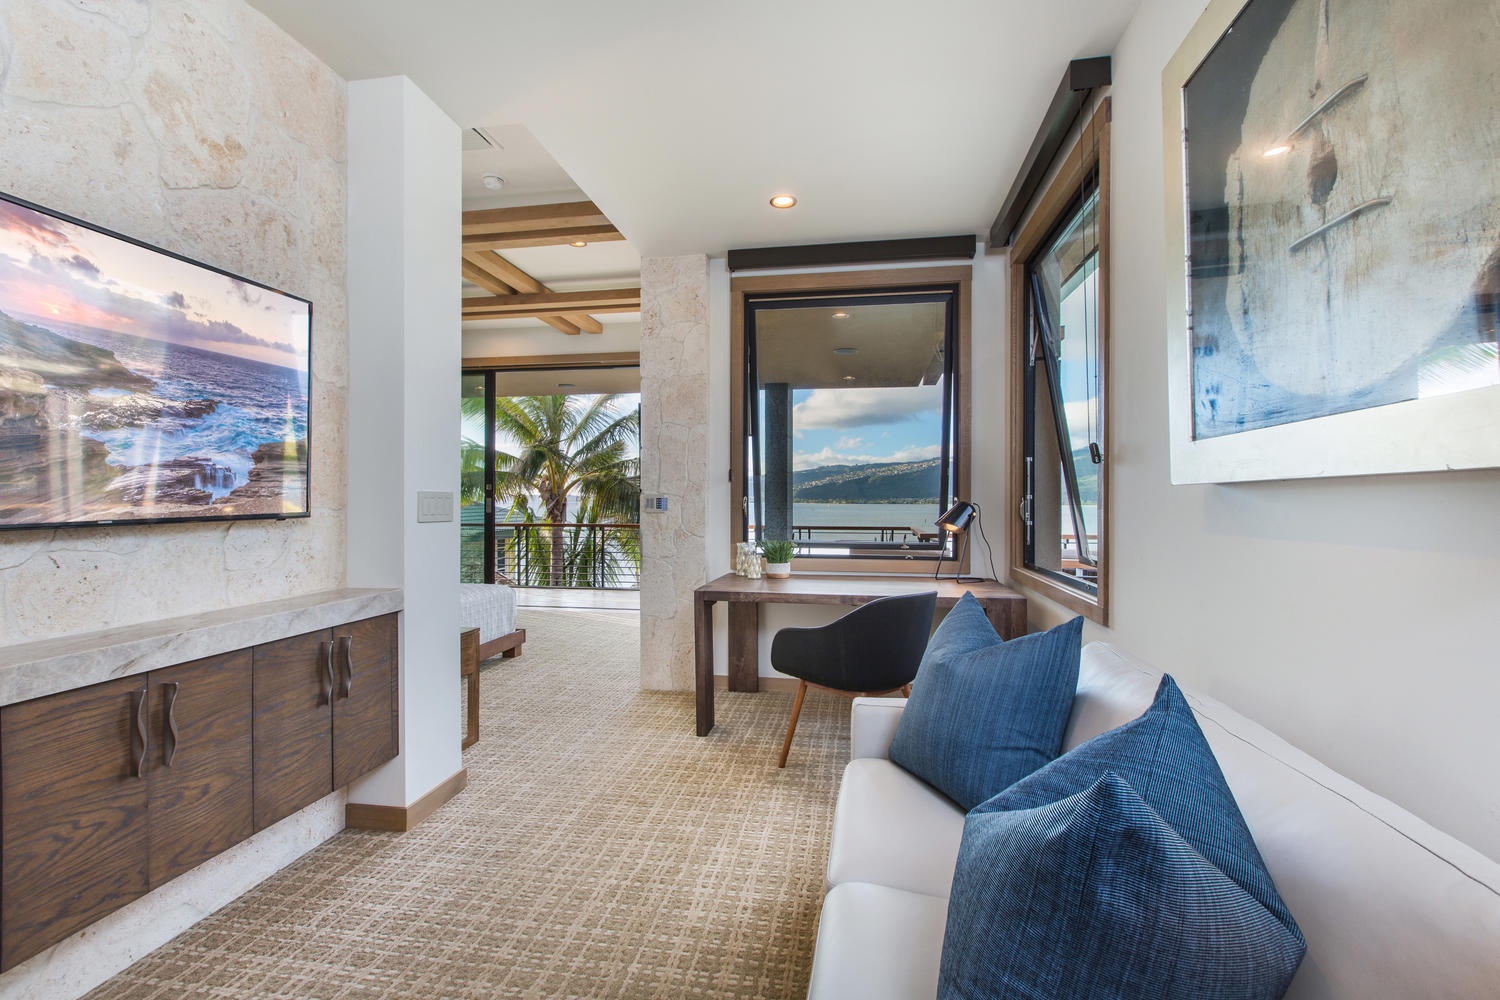 Honolulu Vacation Rentals, Maunalua Bay Estate - Second primary bedroom lounge.